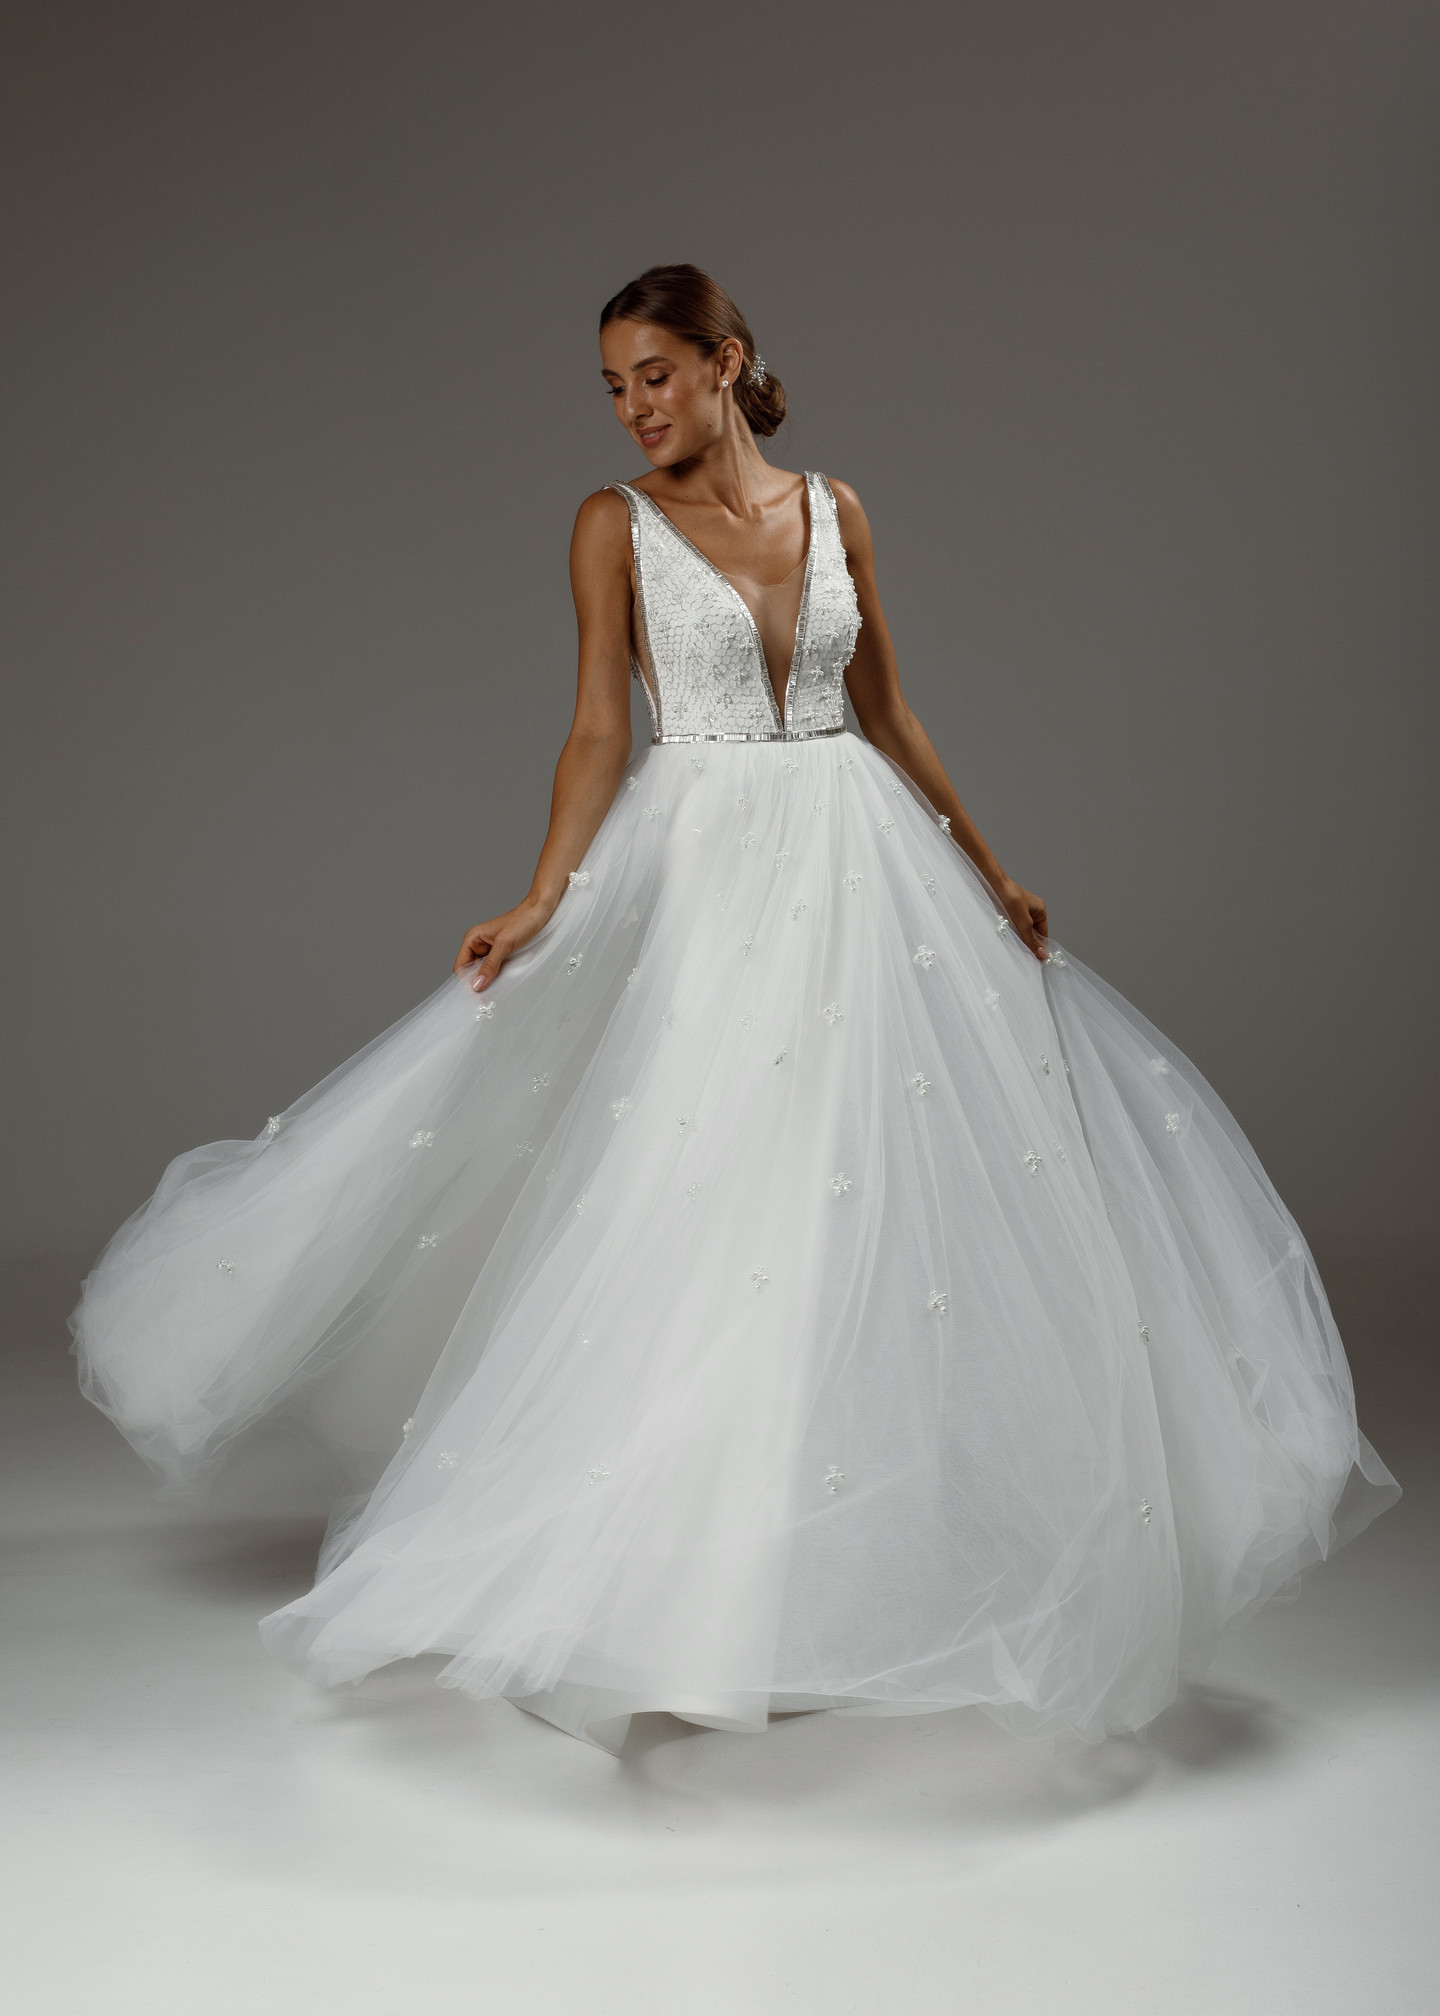 Stephanie gown, 2020, couture, dress, bridal, off-white, tulle, embroidery, A-line